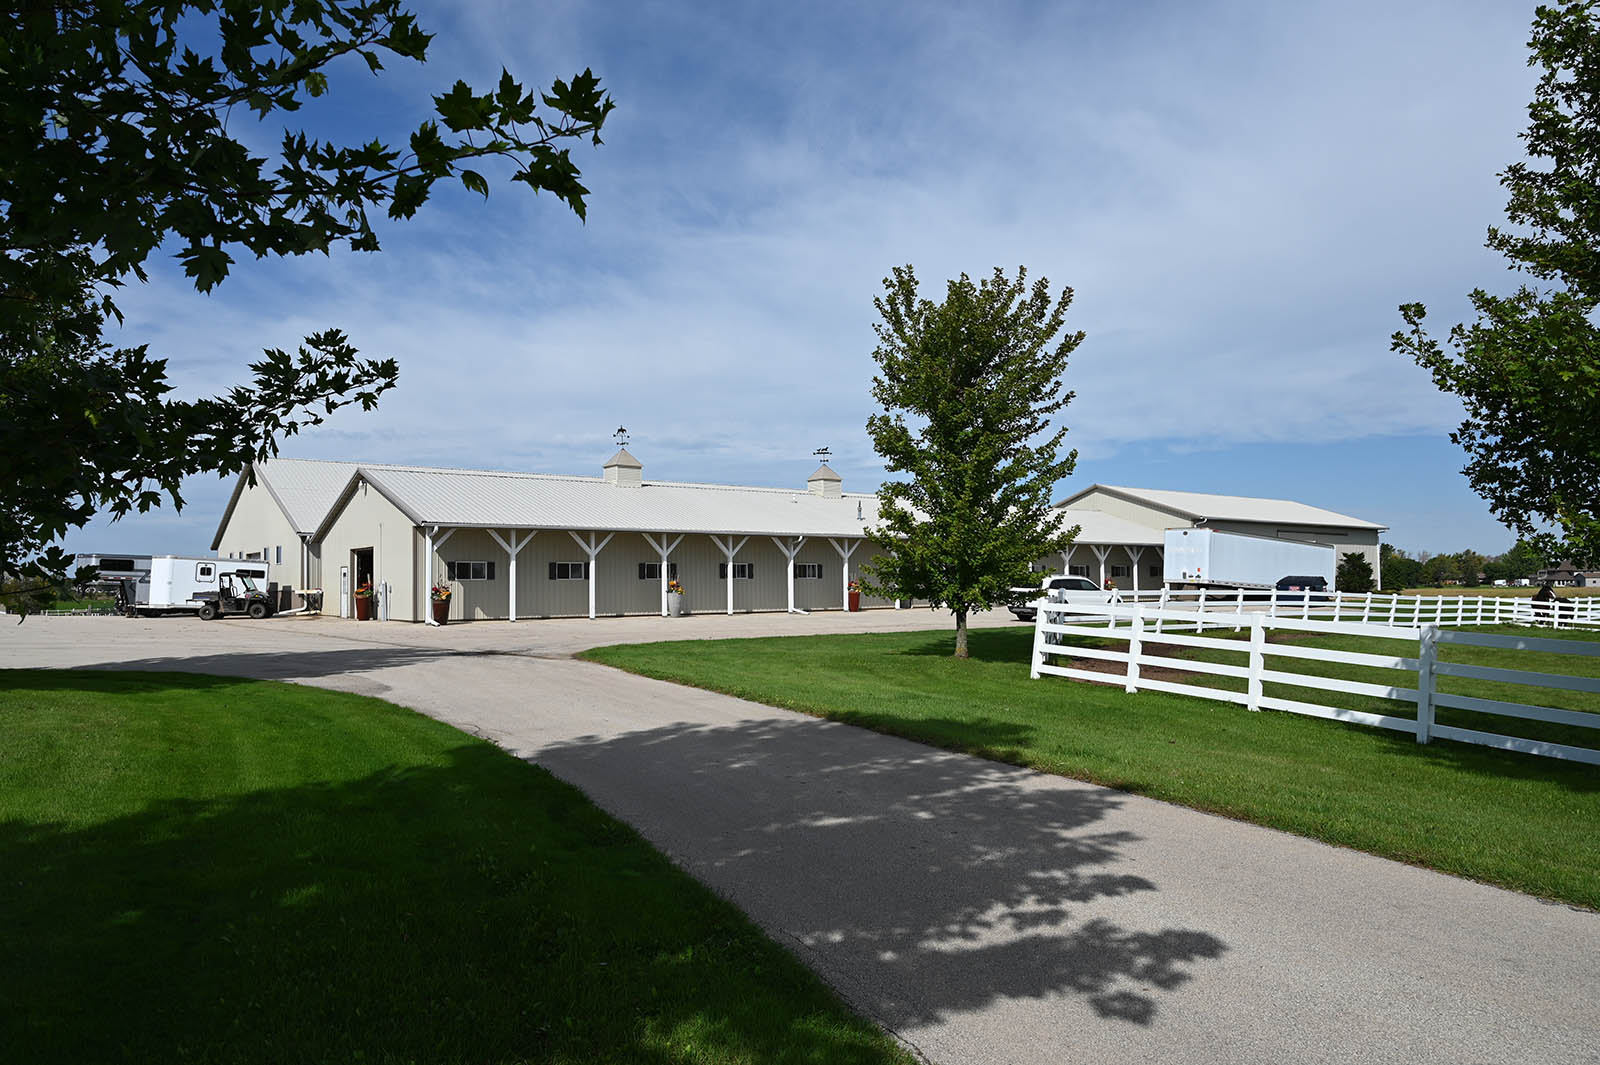 Exterior view of the Whistler's Run 19-stall state-of-the-art equestrian barn in DePere, WI